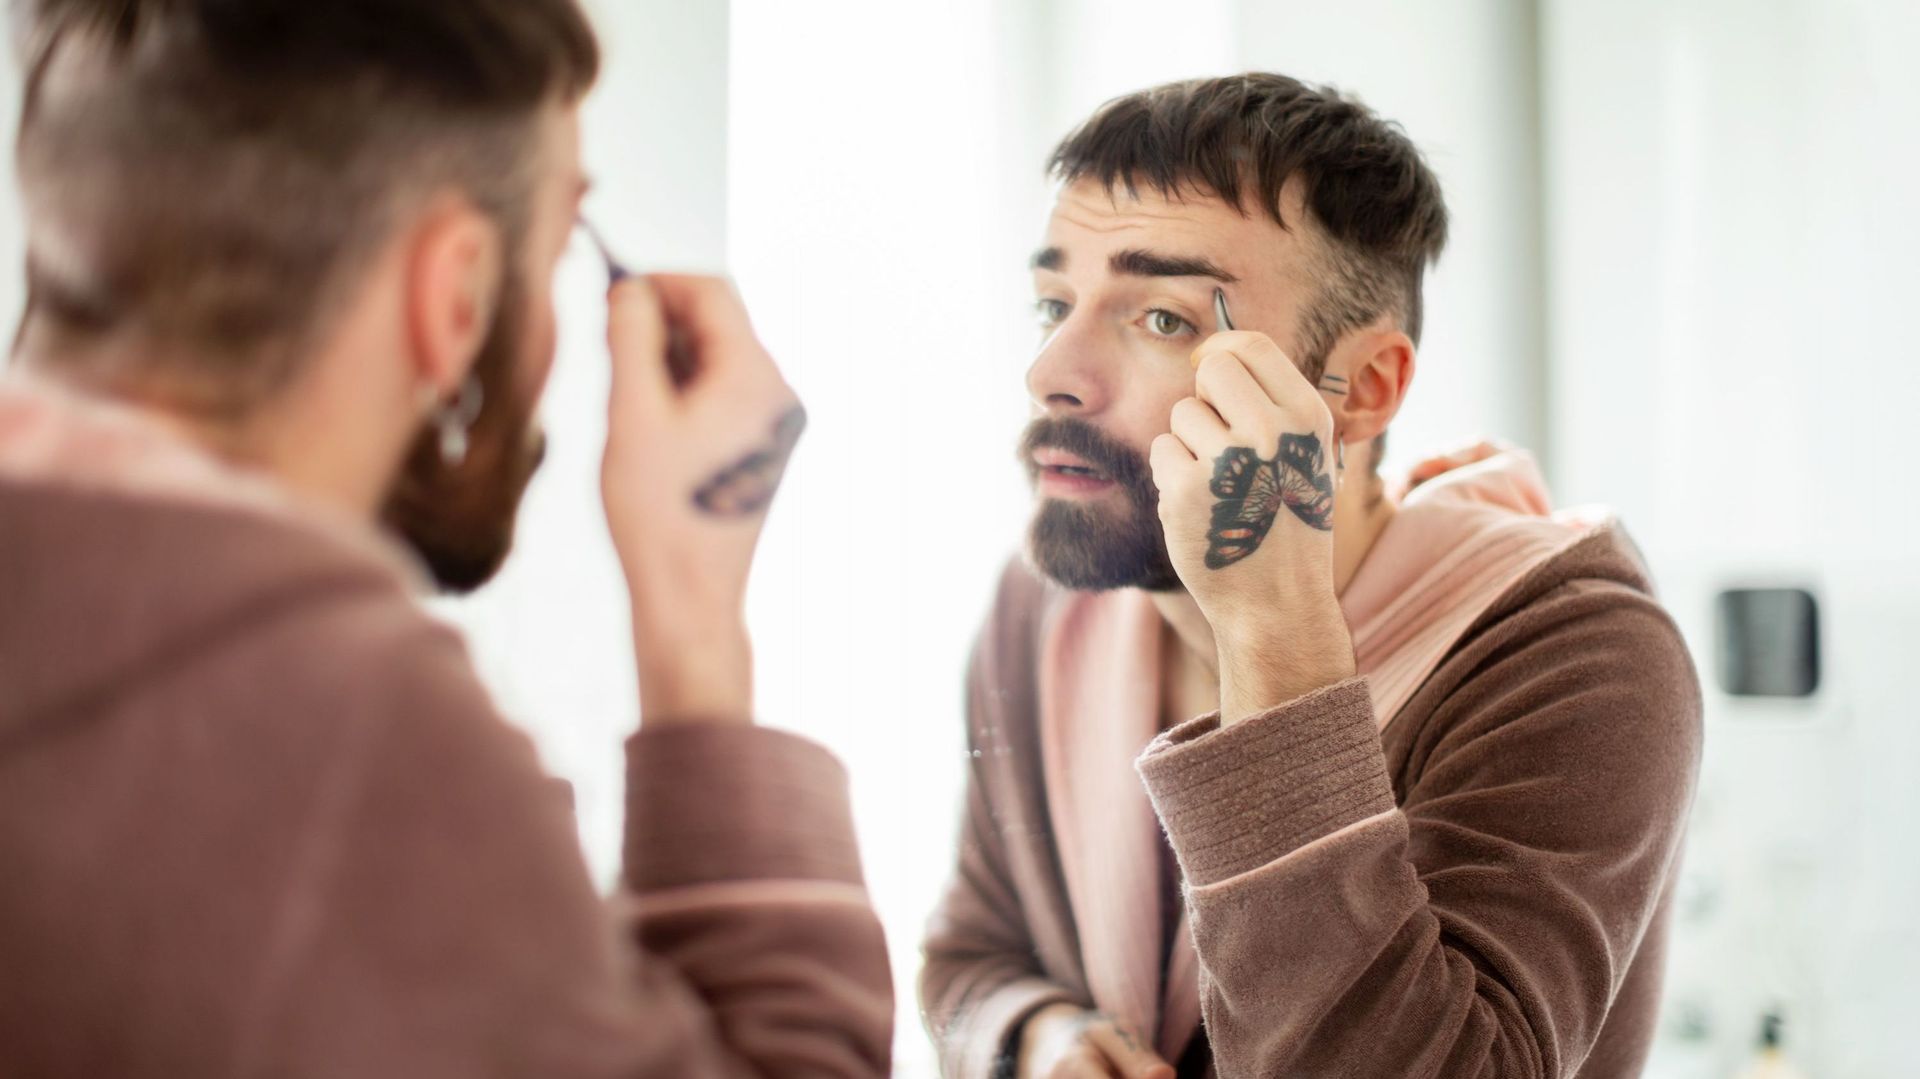 Young man wearing bathrobe plucking eyebrows in front of the bathroom mirror, butterfly tattoo on hand